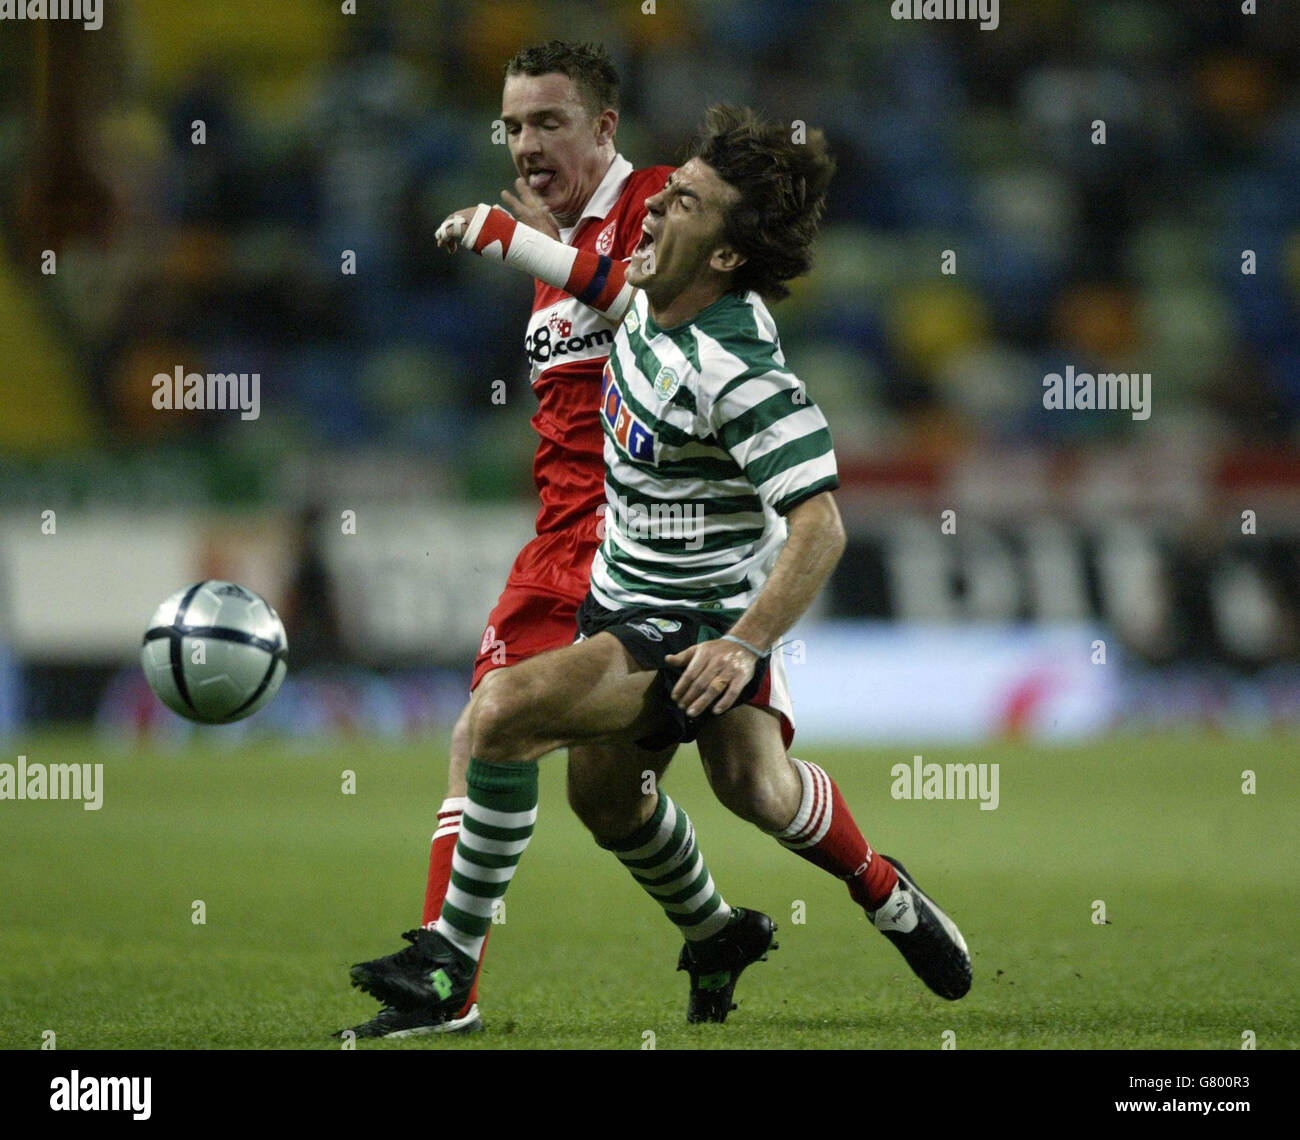 Middlesbrough's Anthony McMahon (L) wins tackle against Sporting Lisbon's Sa Pinto. Stock Photo